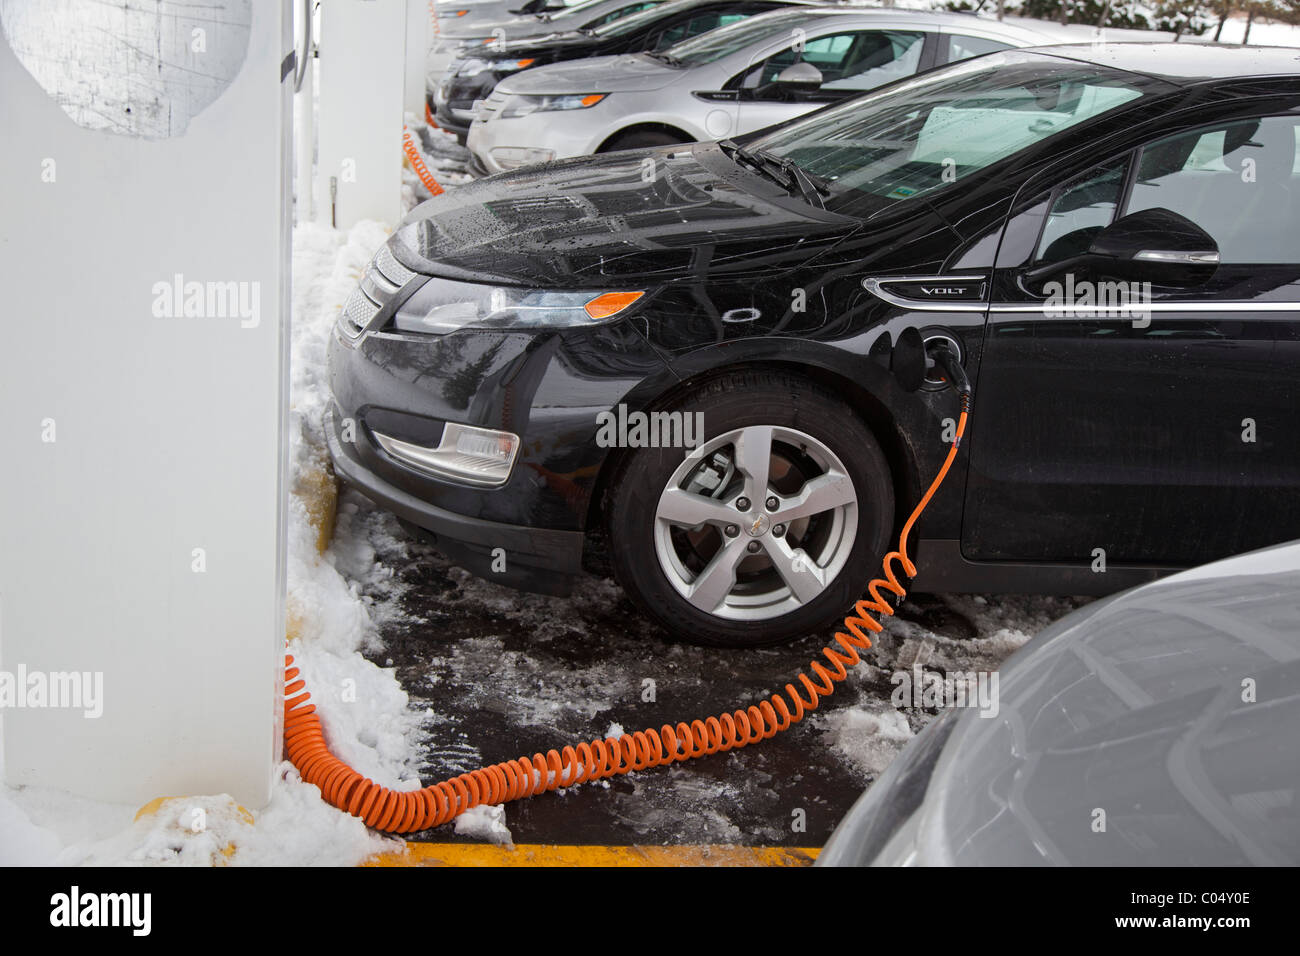 Chevrolet Volt Electric Cars Charging Outside the Factory Where They are Manufactured Stock Photo